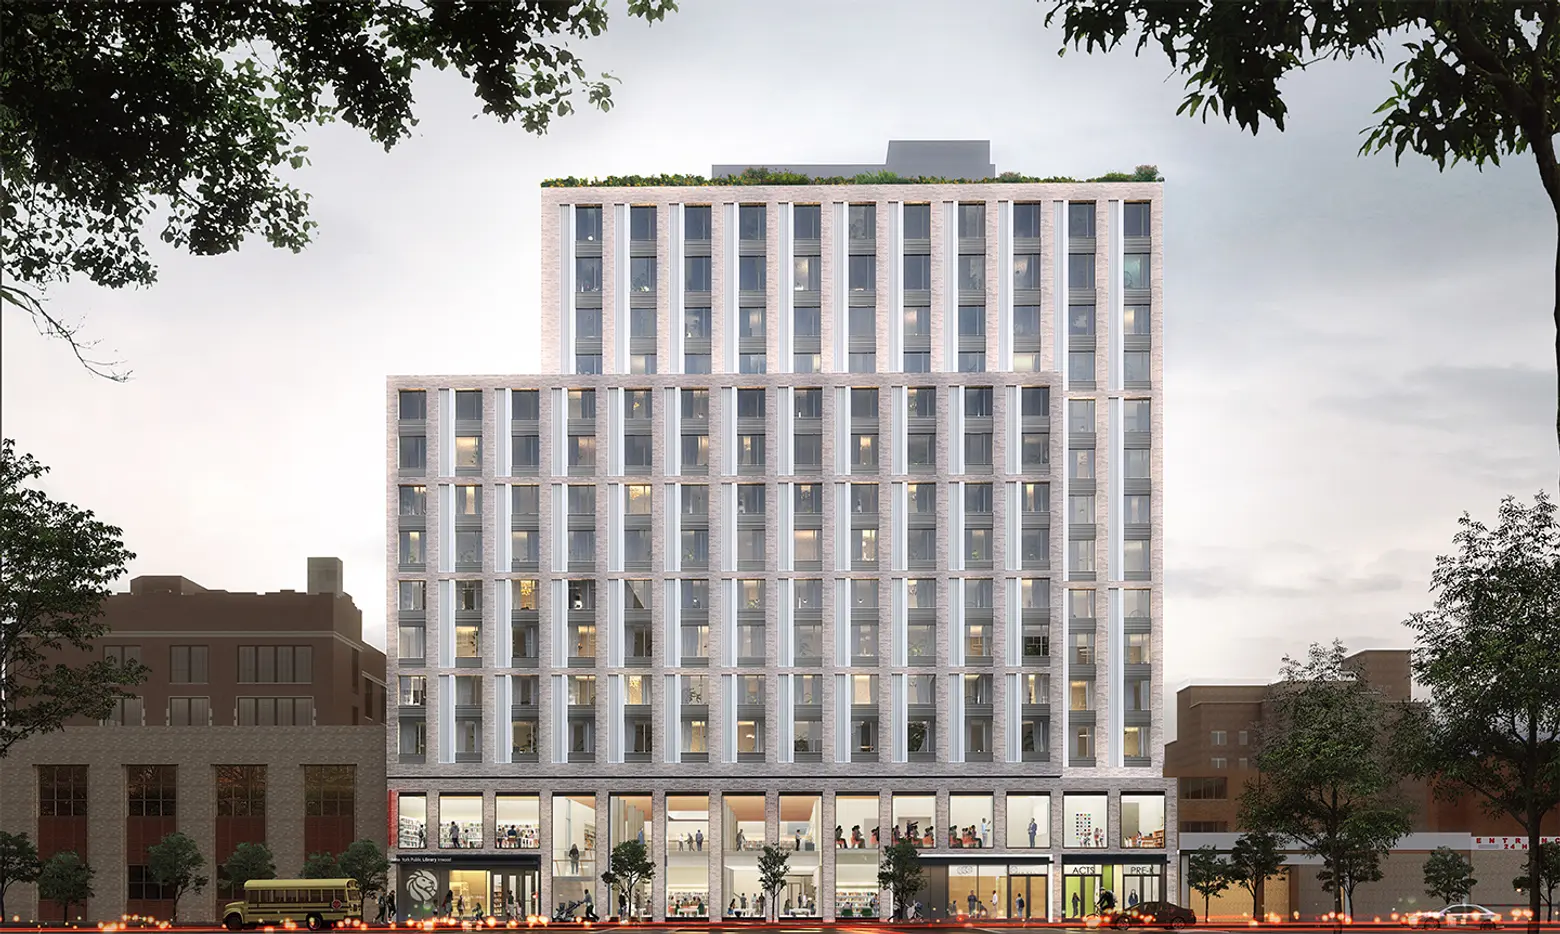 Live above Inwood’s new public library, from $397/month